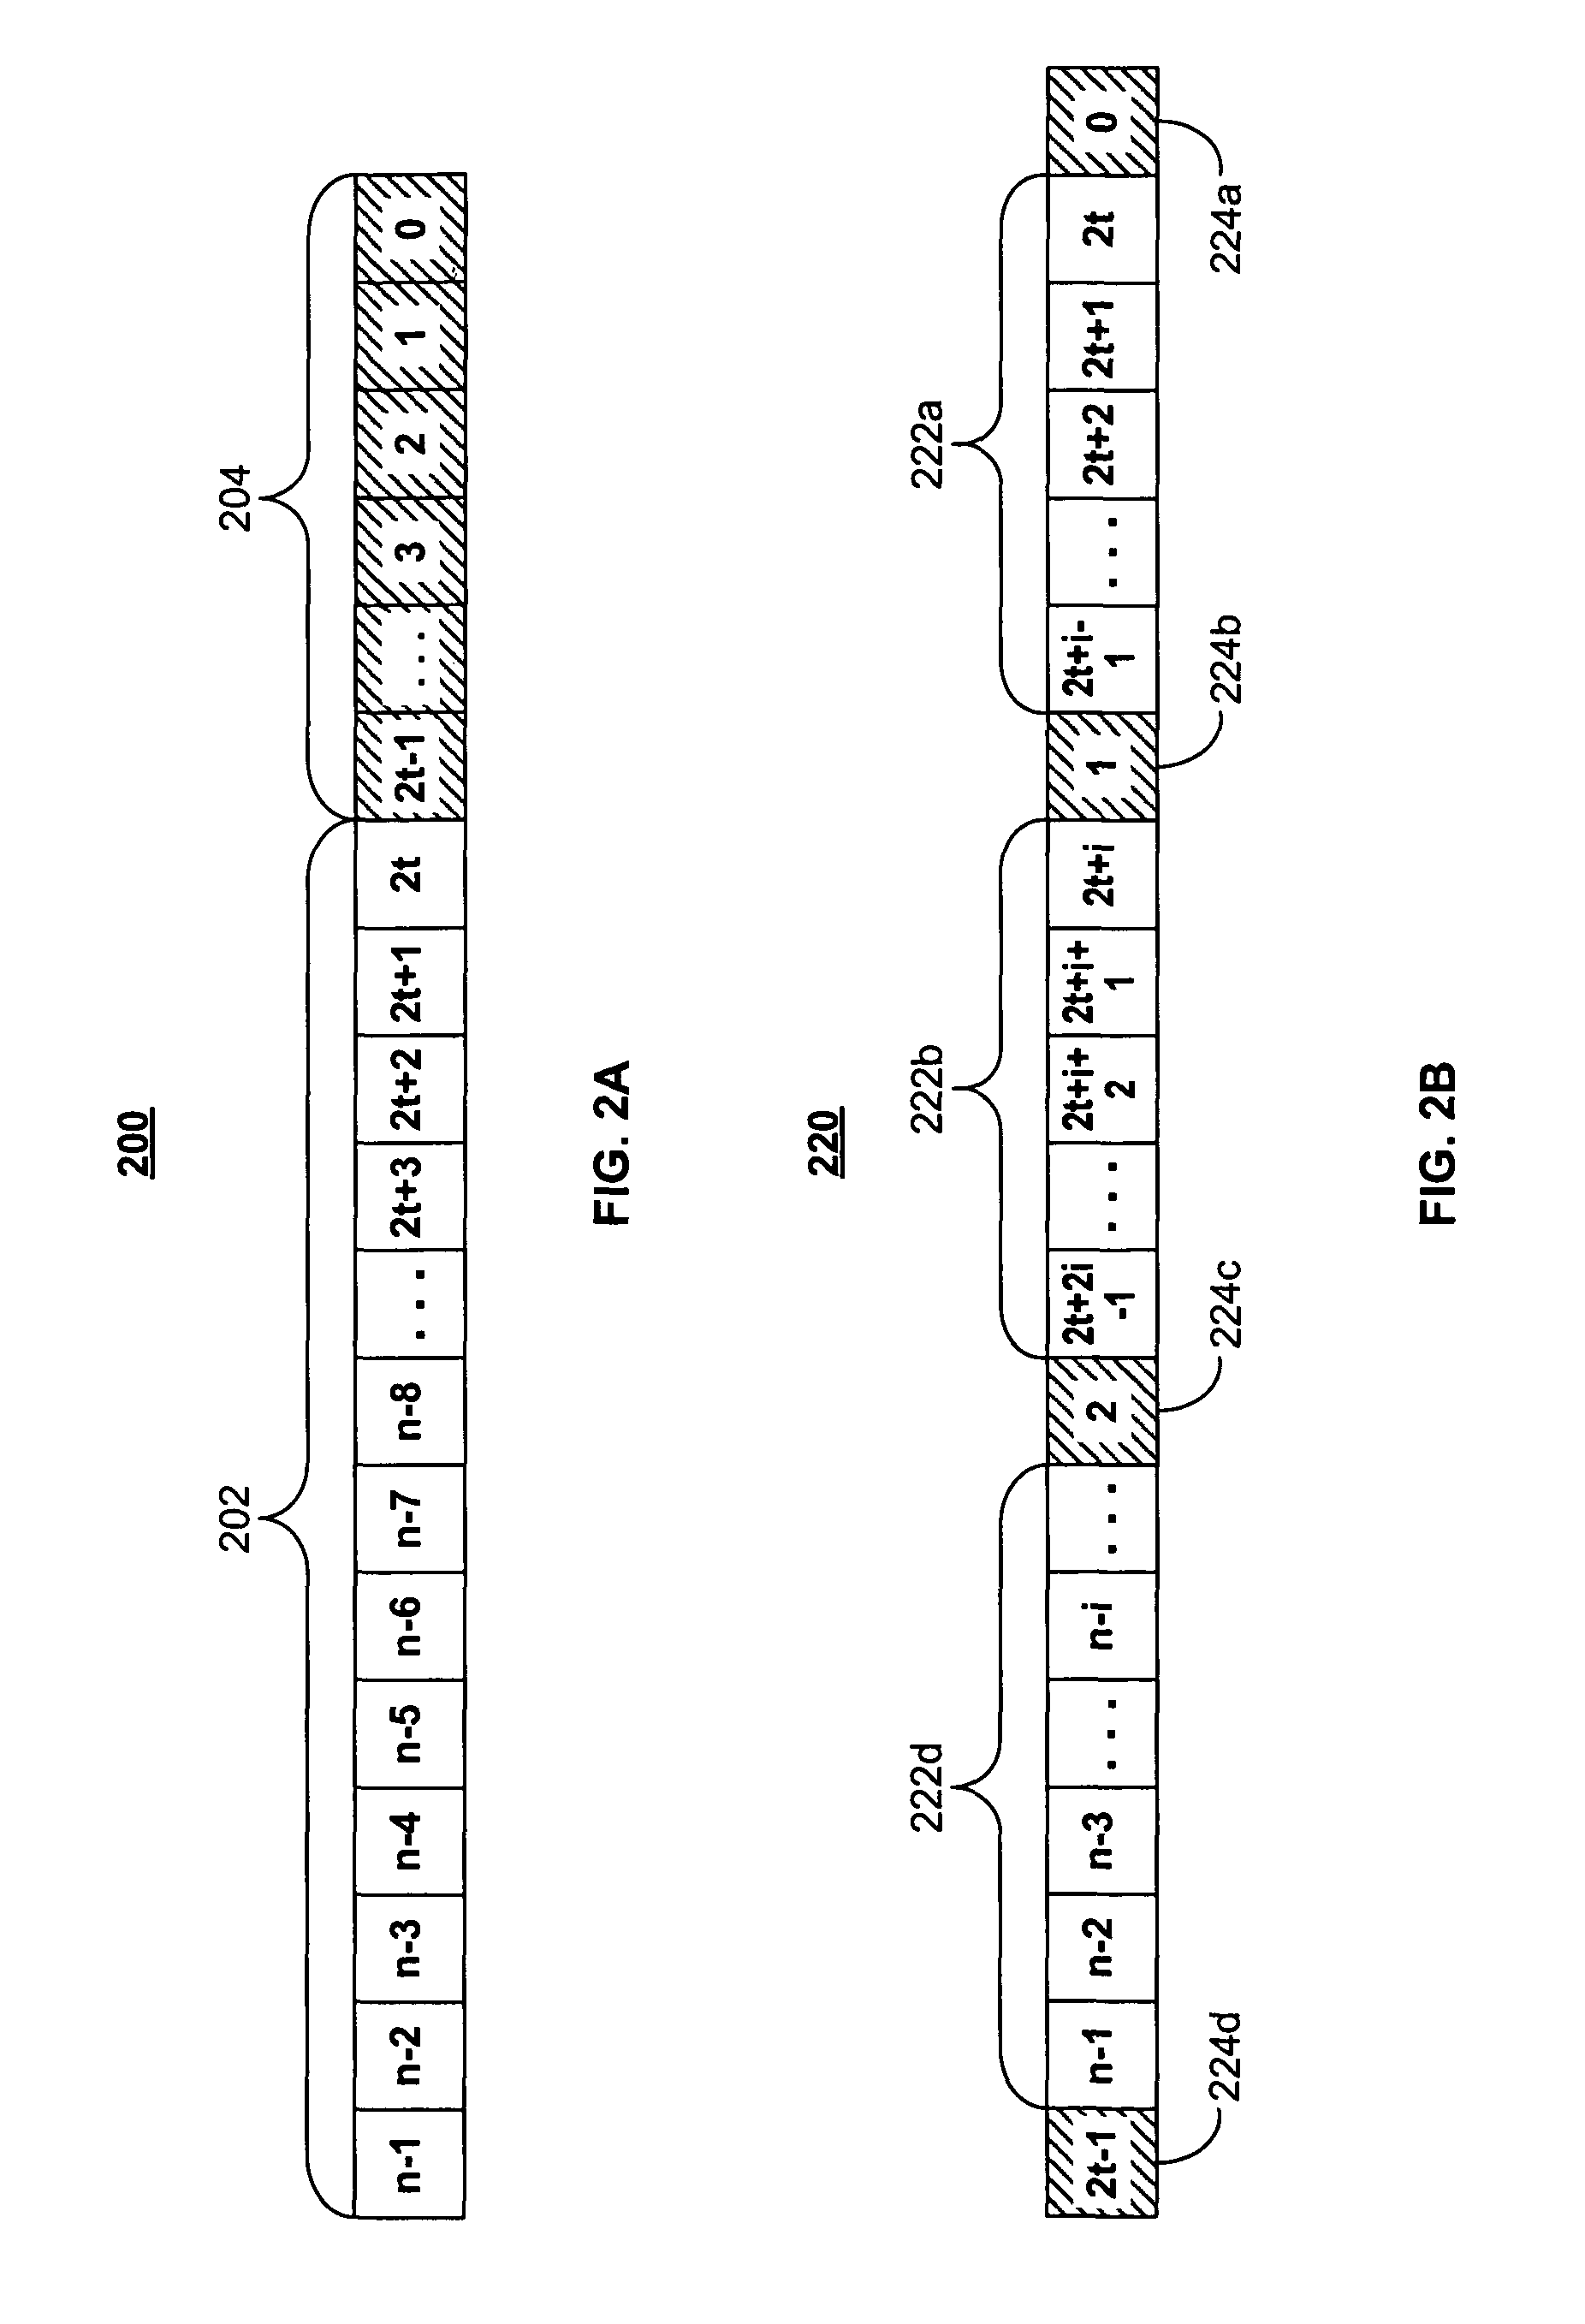 Systems and methods for achieving higher coding rate using parity interleaving